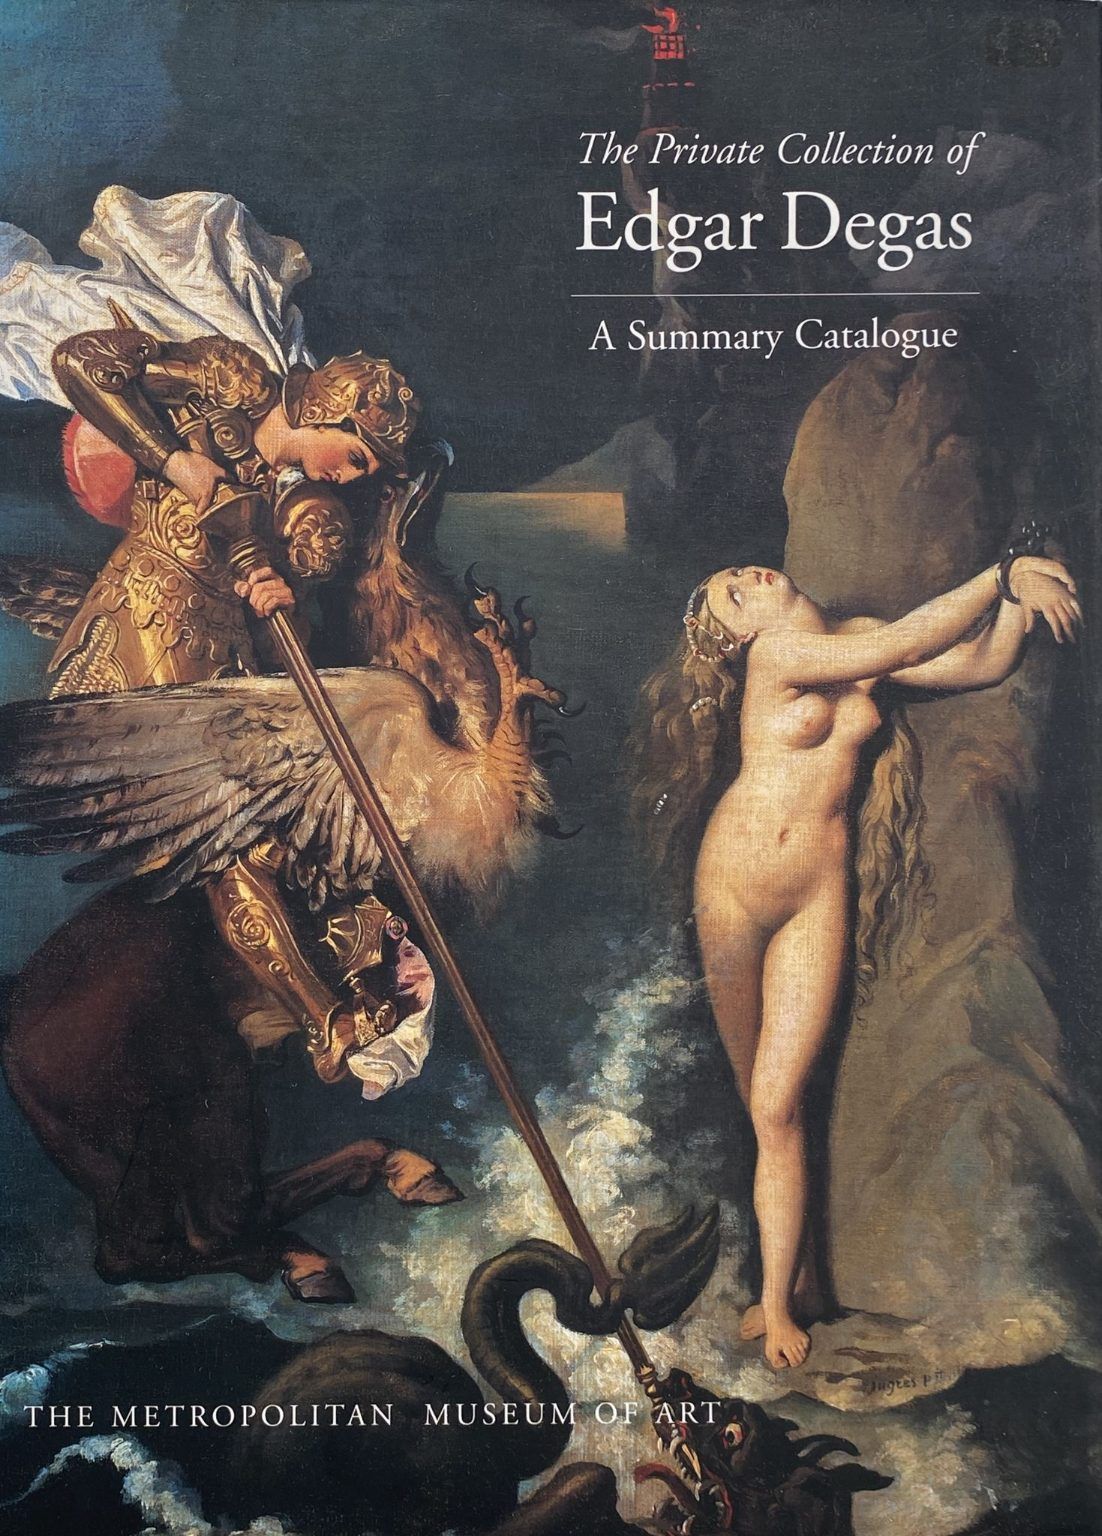 THE PRIVATE COLLECTION OF EDGAR DEGAS: A Summary Catalogue